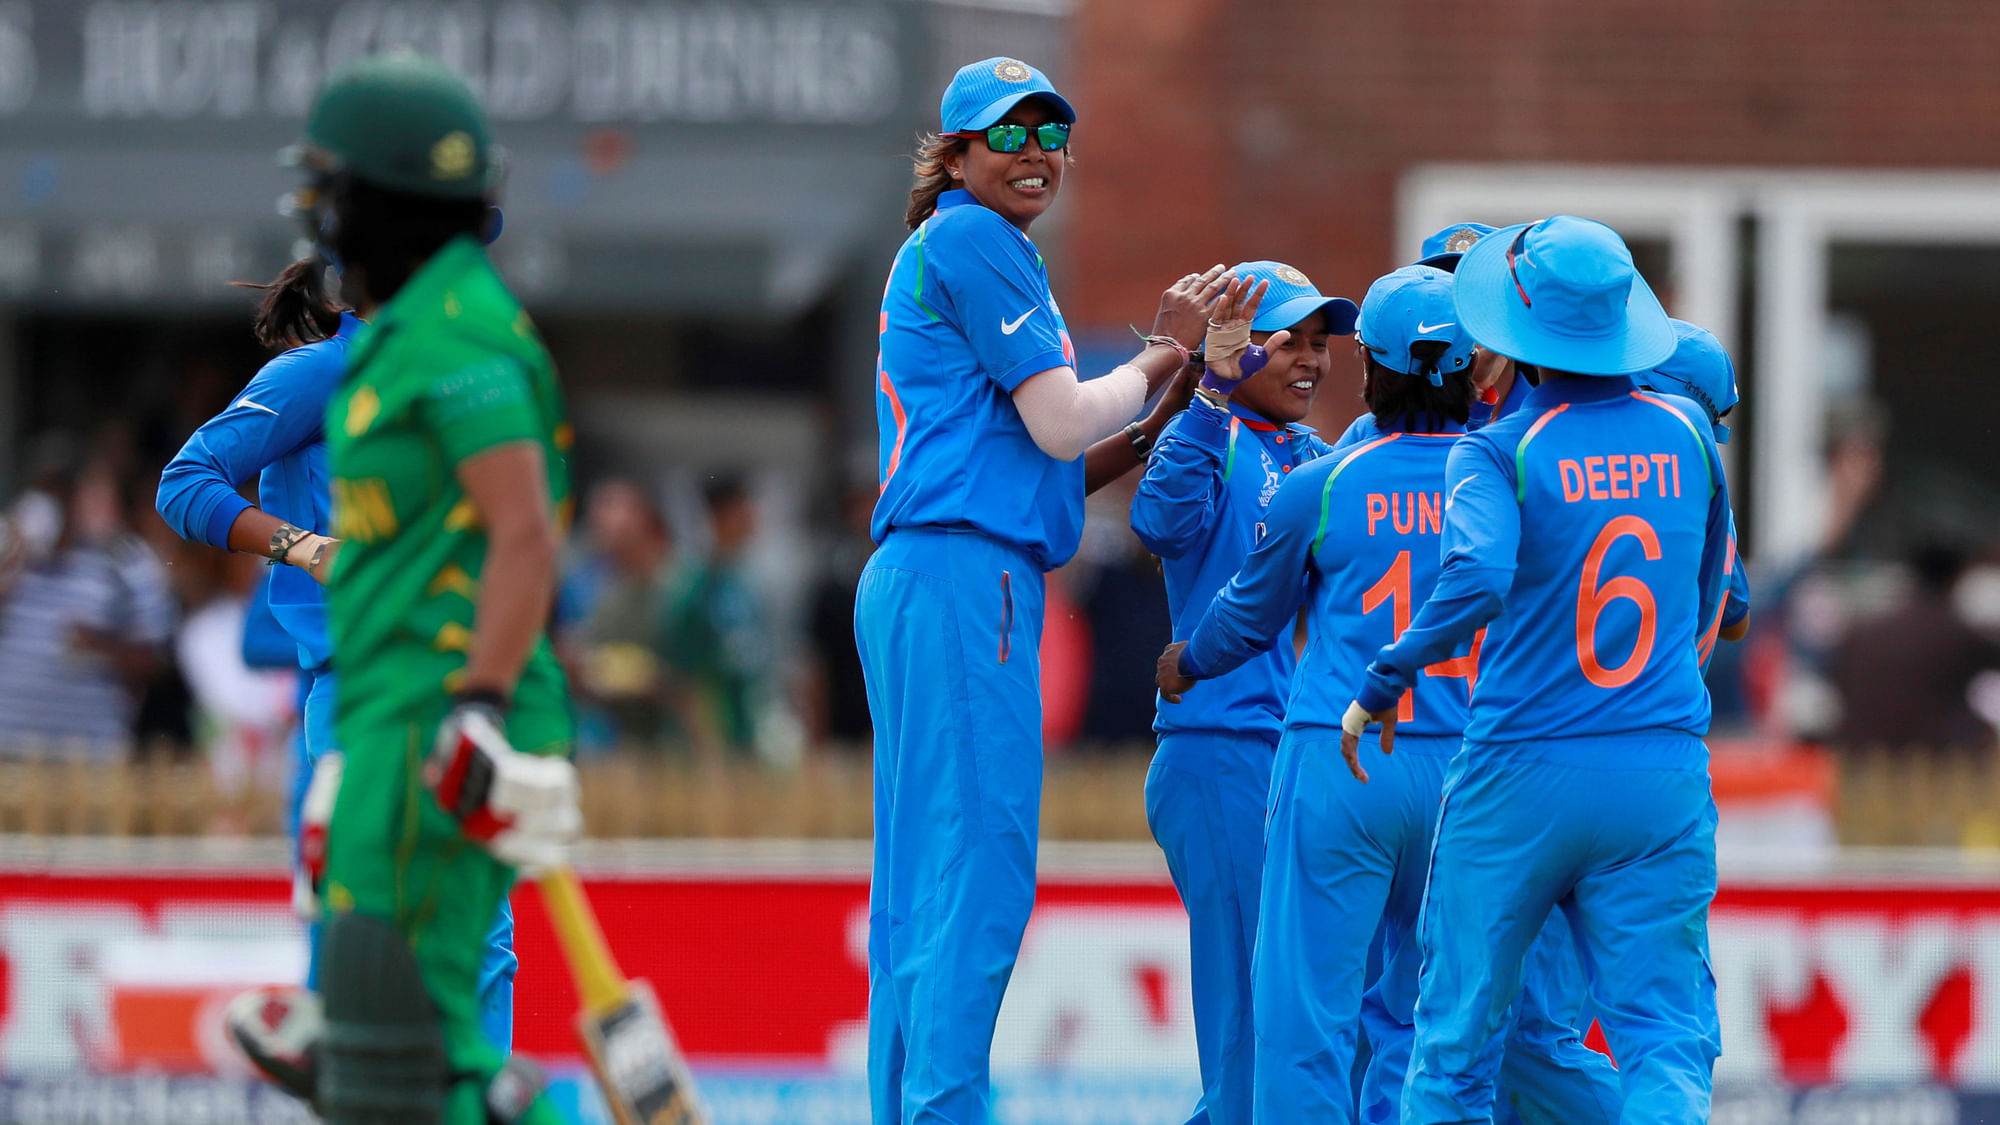 India beat Pakistan by 95 runs in the Women’s World Cup match on Sunday.